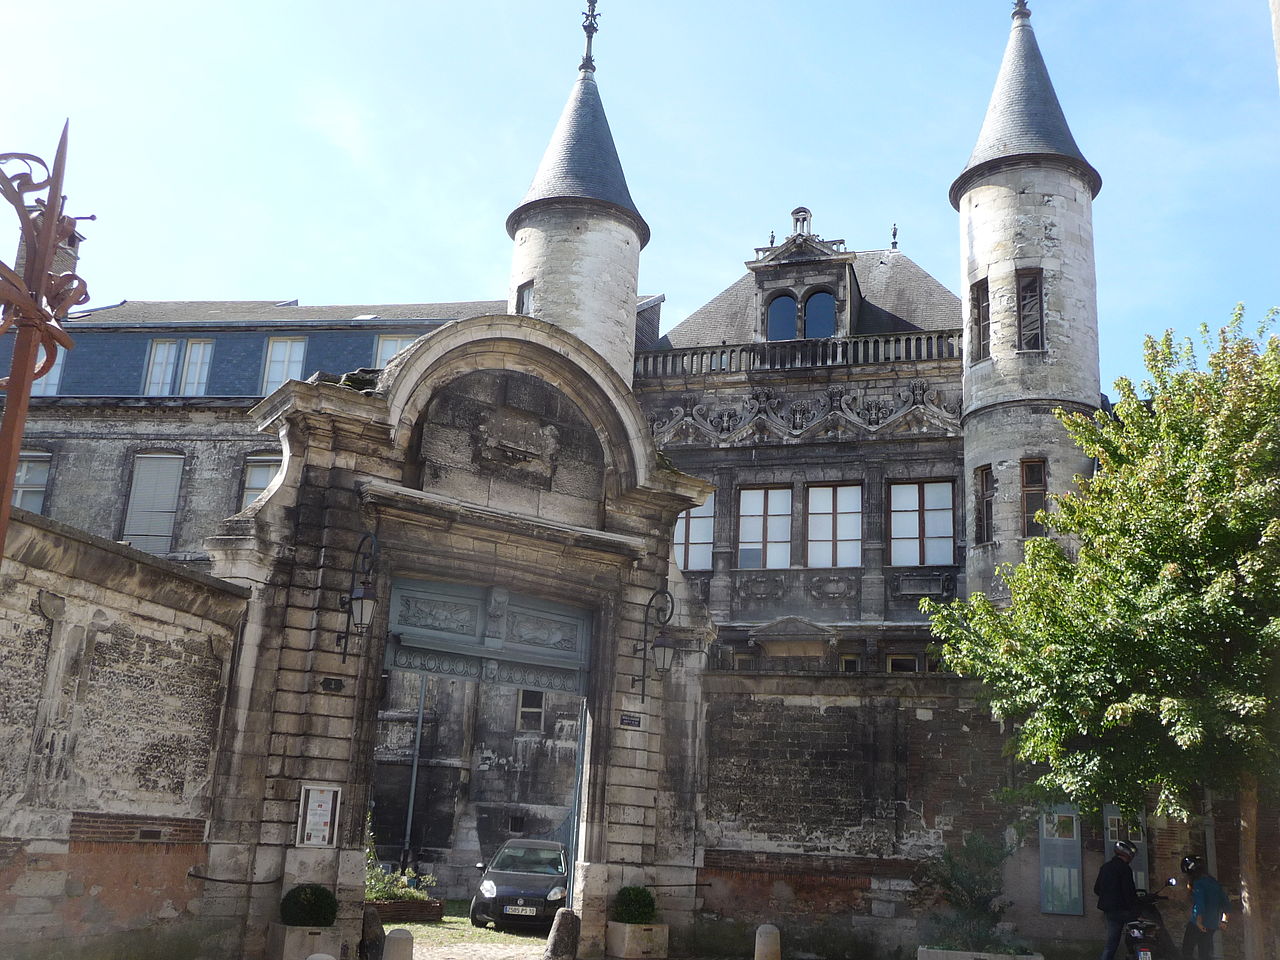 Bonneterie Museum of Troyes